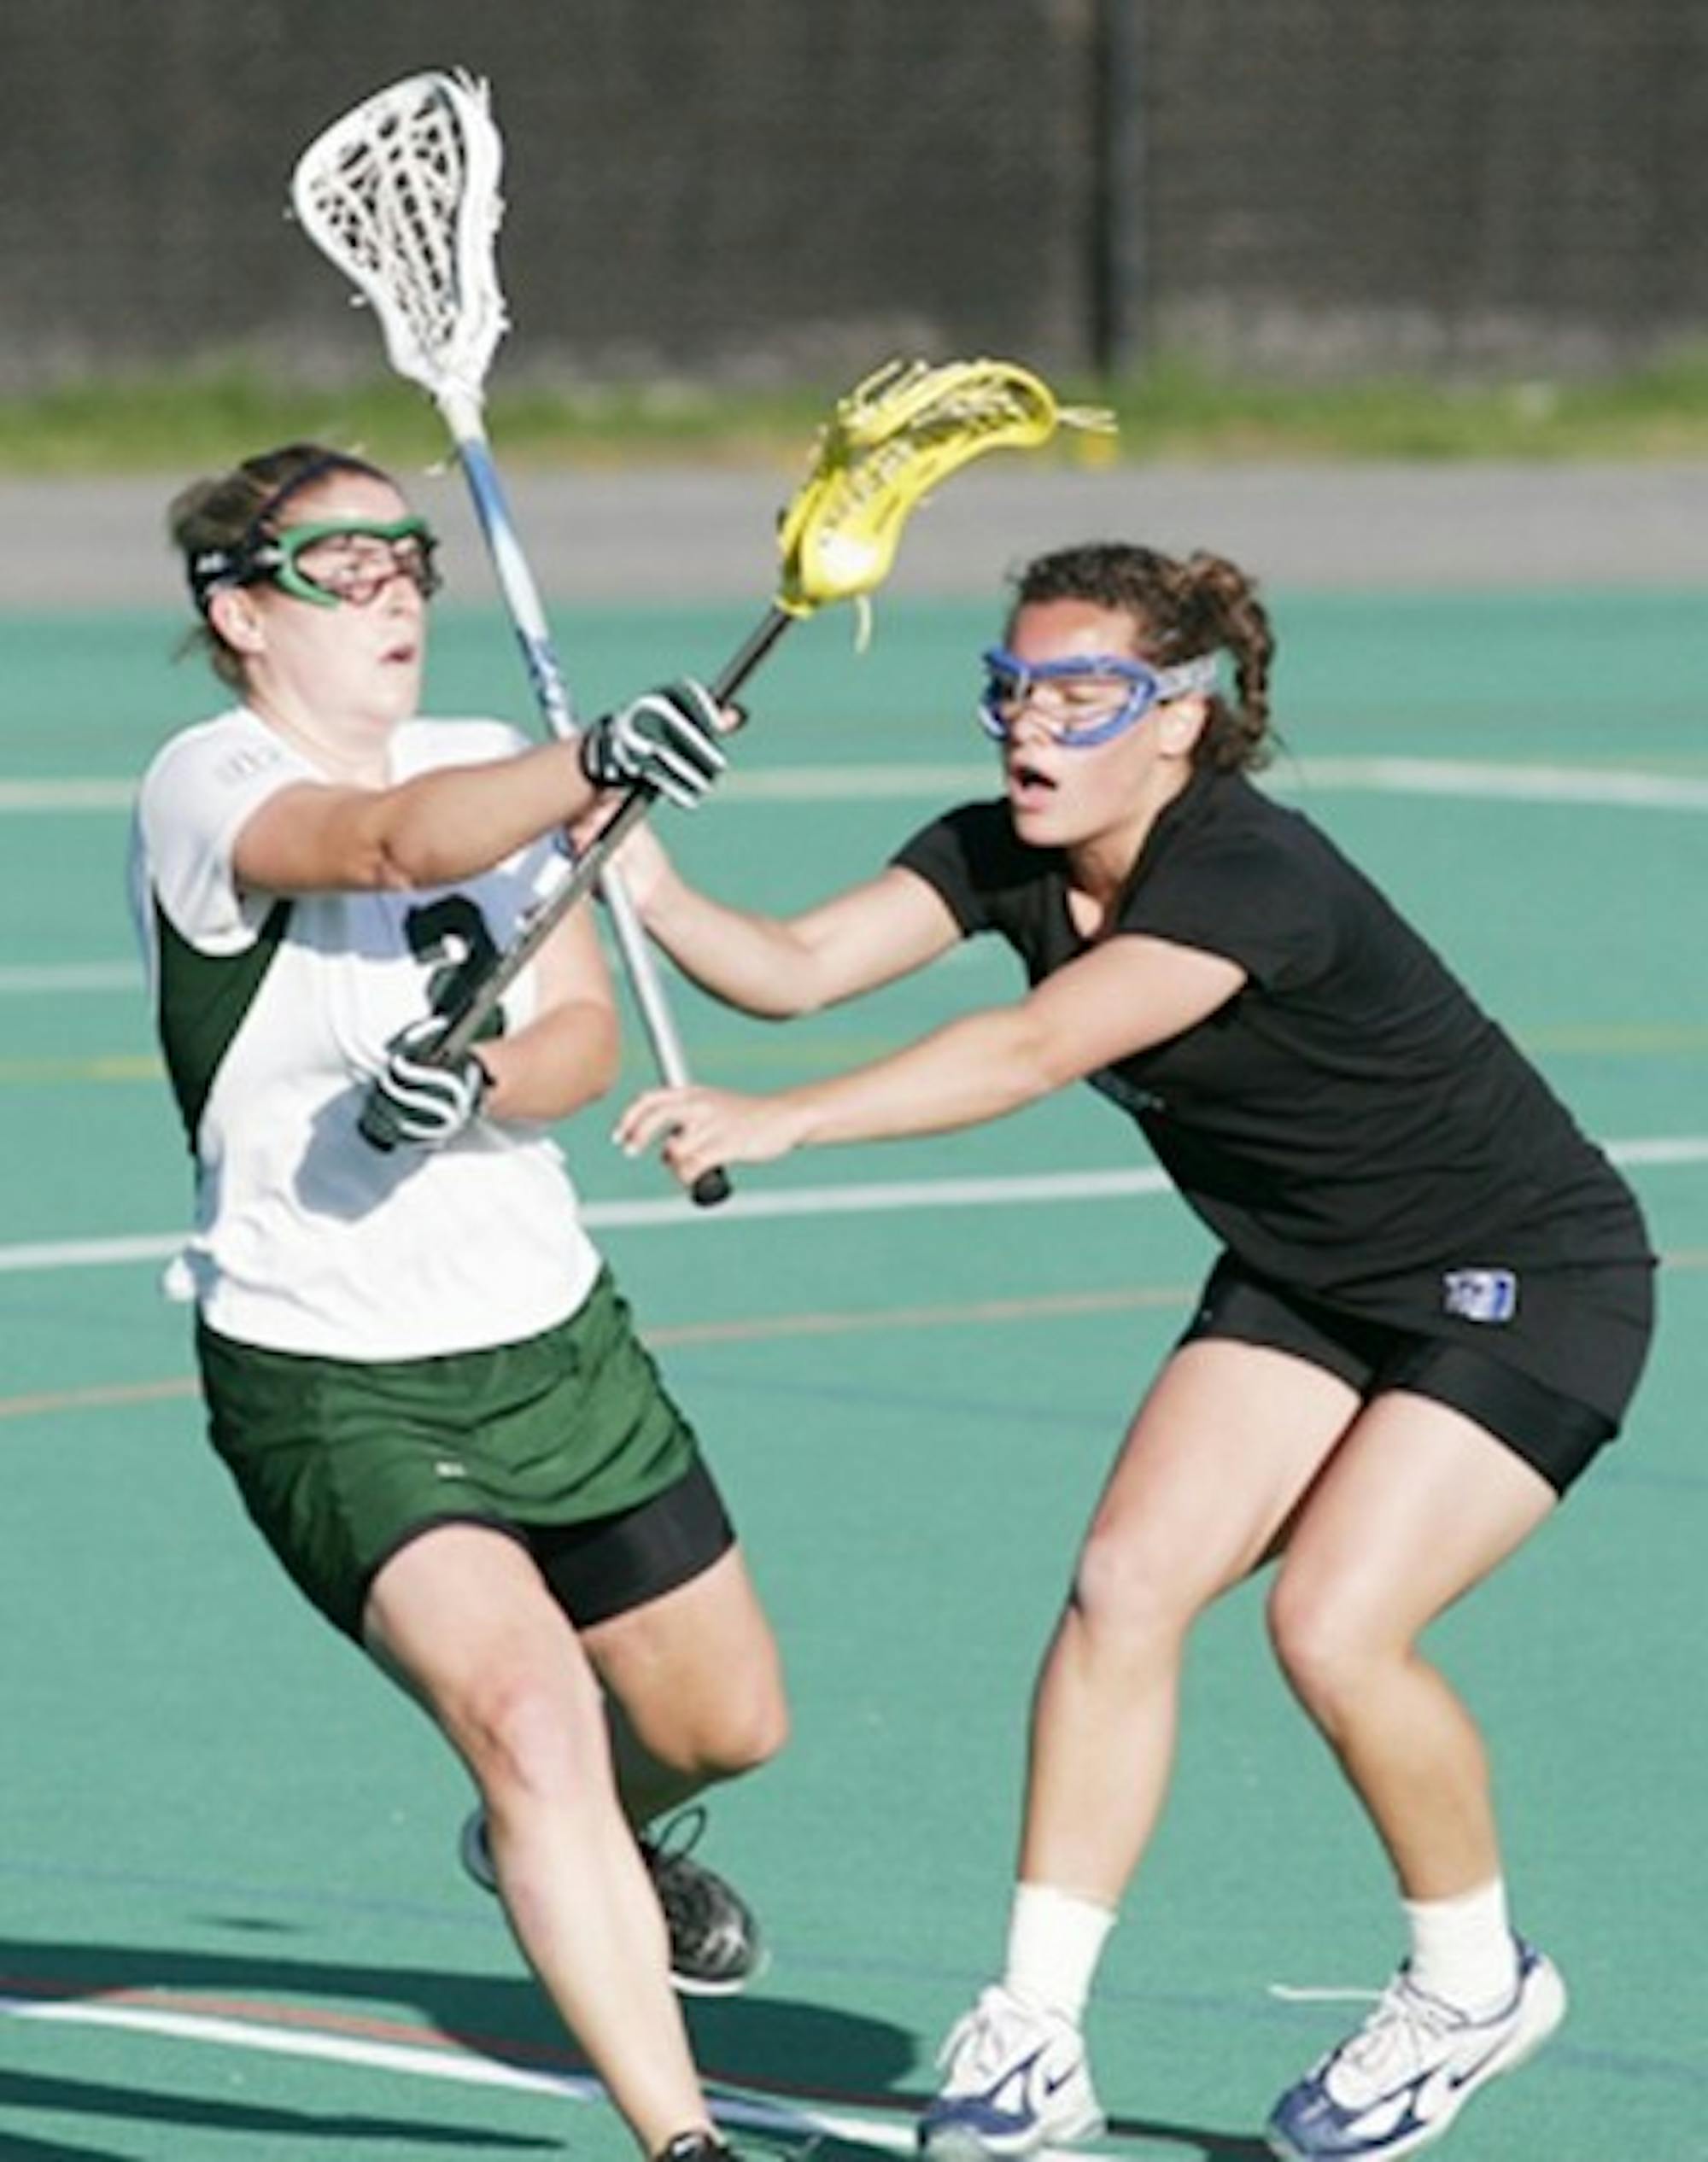 Co-captain Kristen Zimmer '06 passes the ball against Duke this spring. Dartmouth lost to Duke but made it all the way to the national finals.